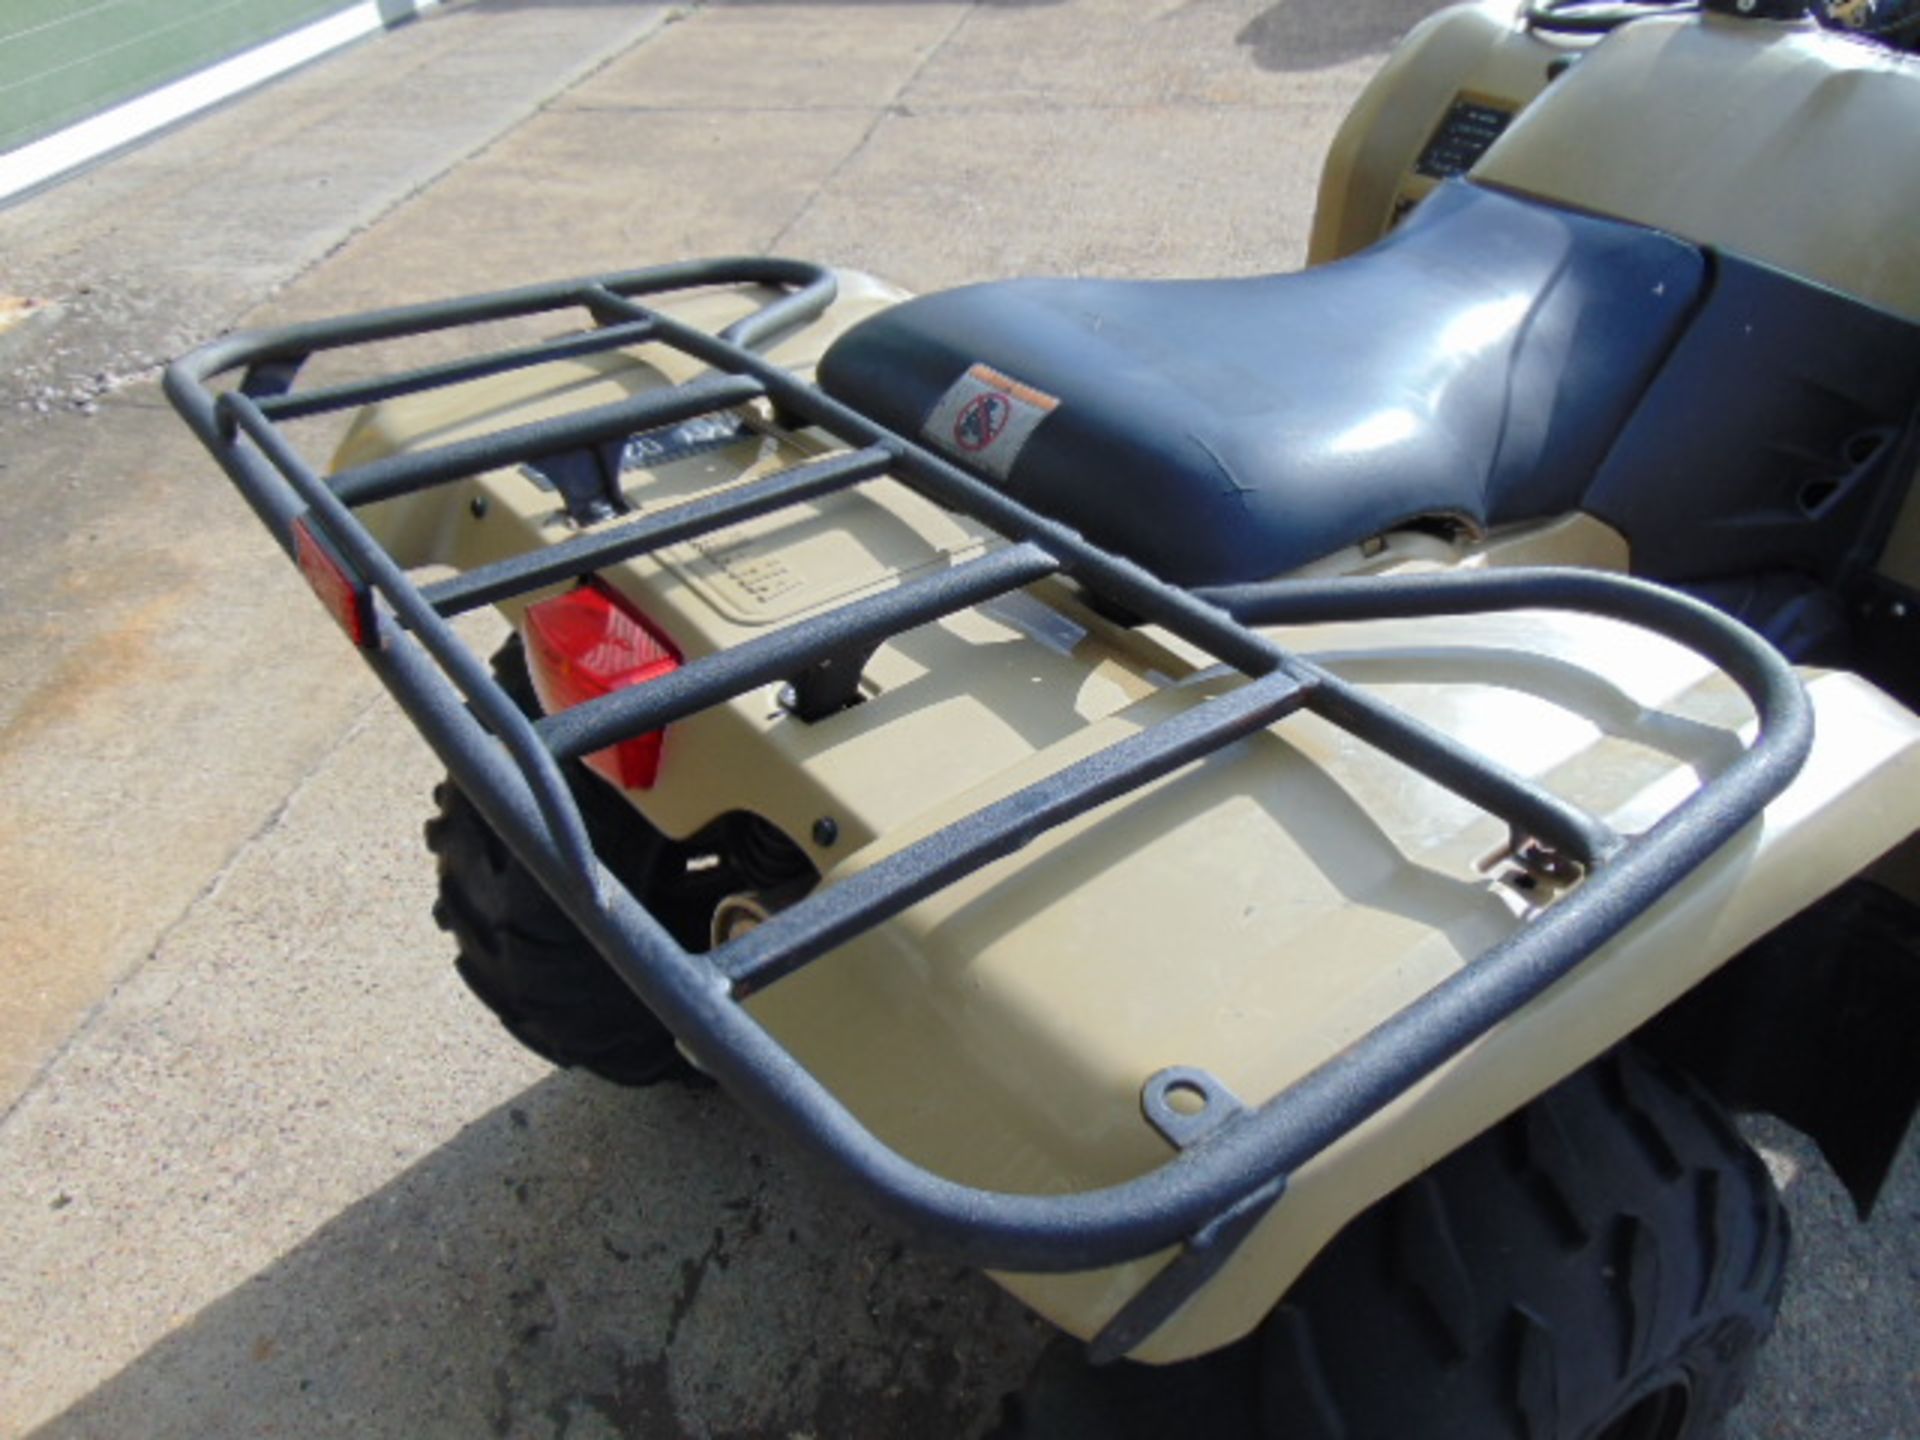 Military Specification Yamaha Grizzly 450 4 x 4 ATV Quad Bike Complete with Winch ONLY 130 HOURS! - Image 10 of 20